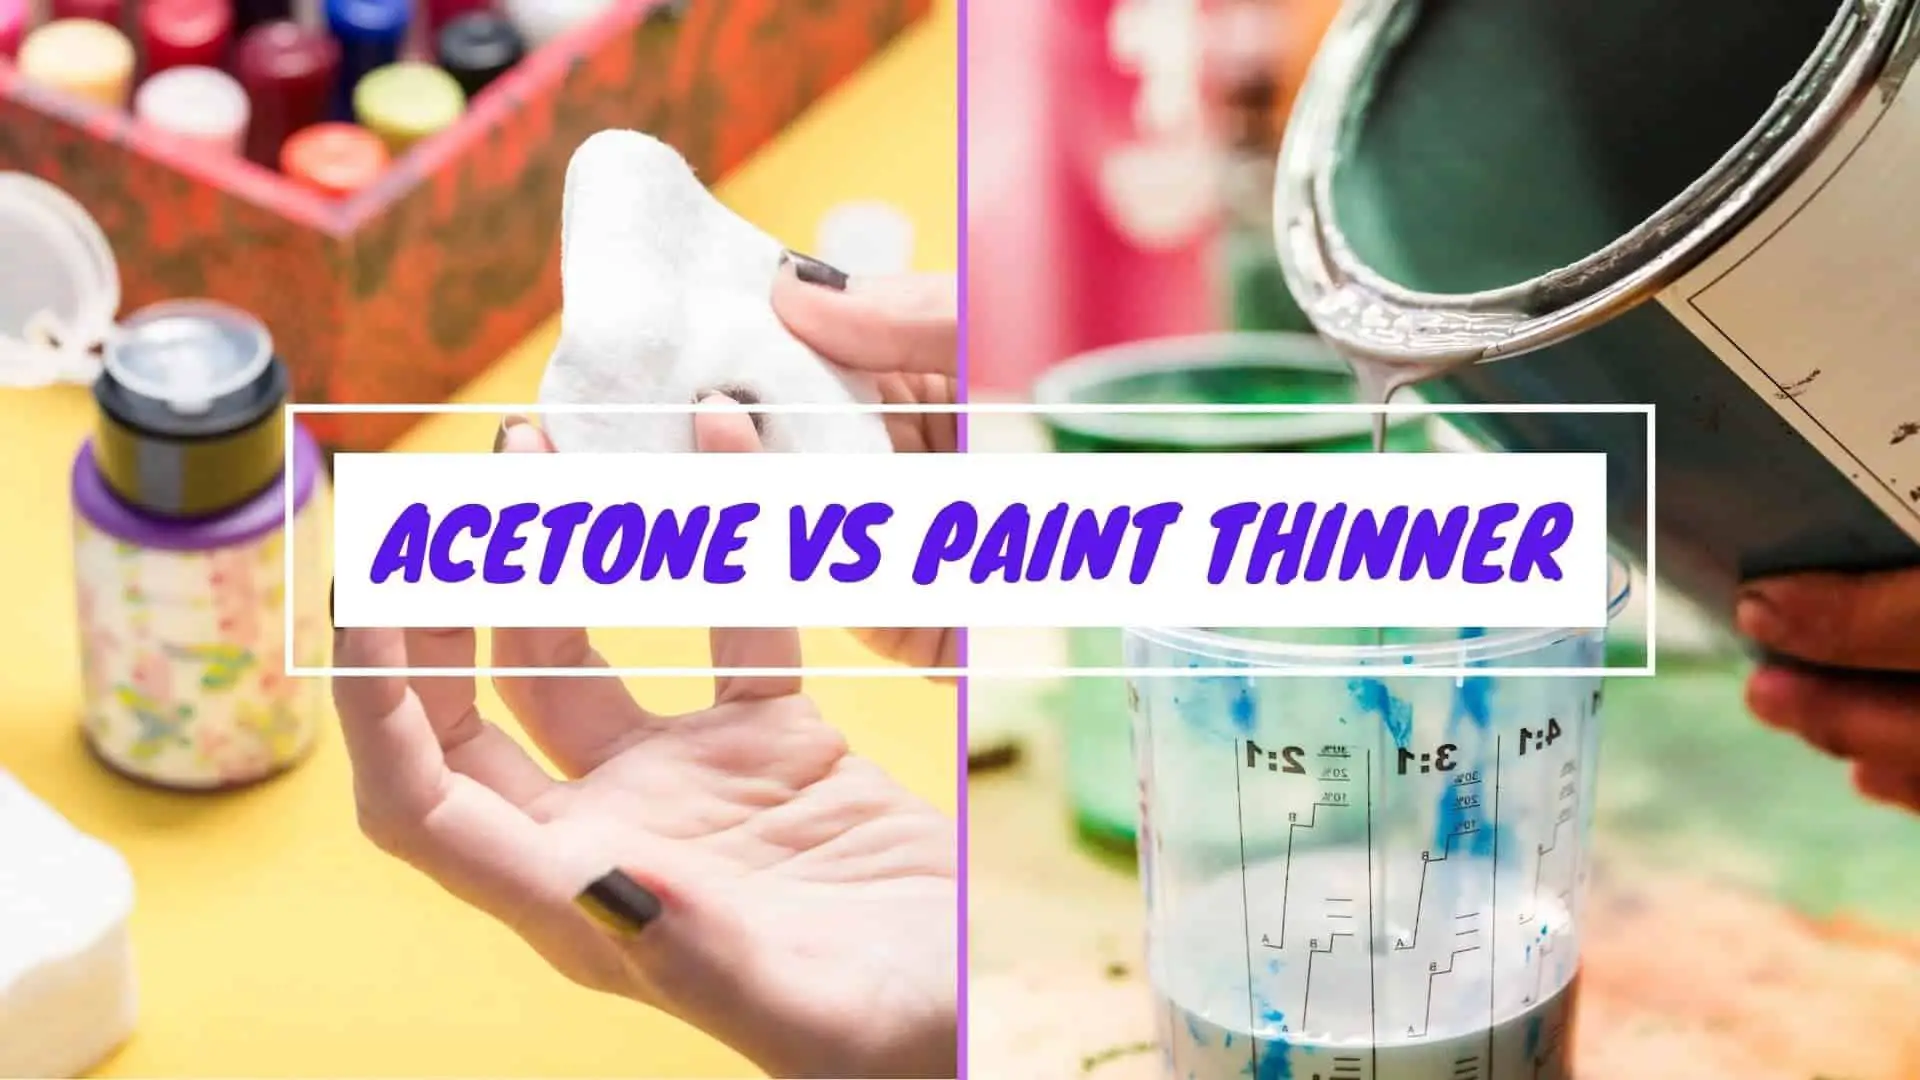 Difference Between Acetone vs Paint Thinner